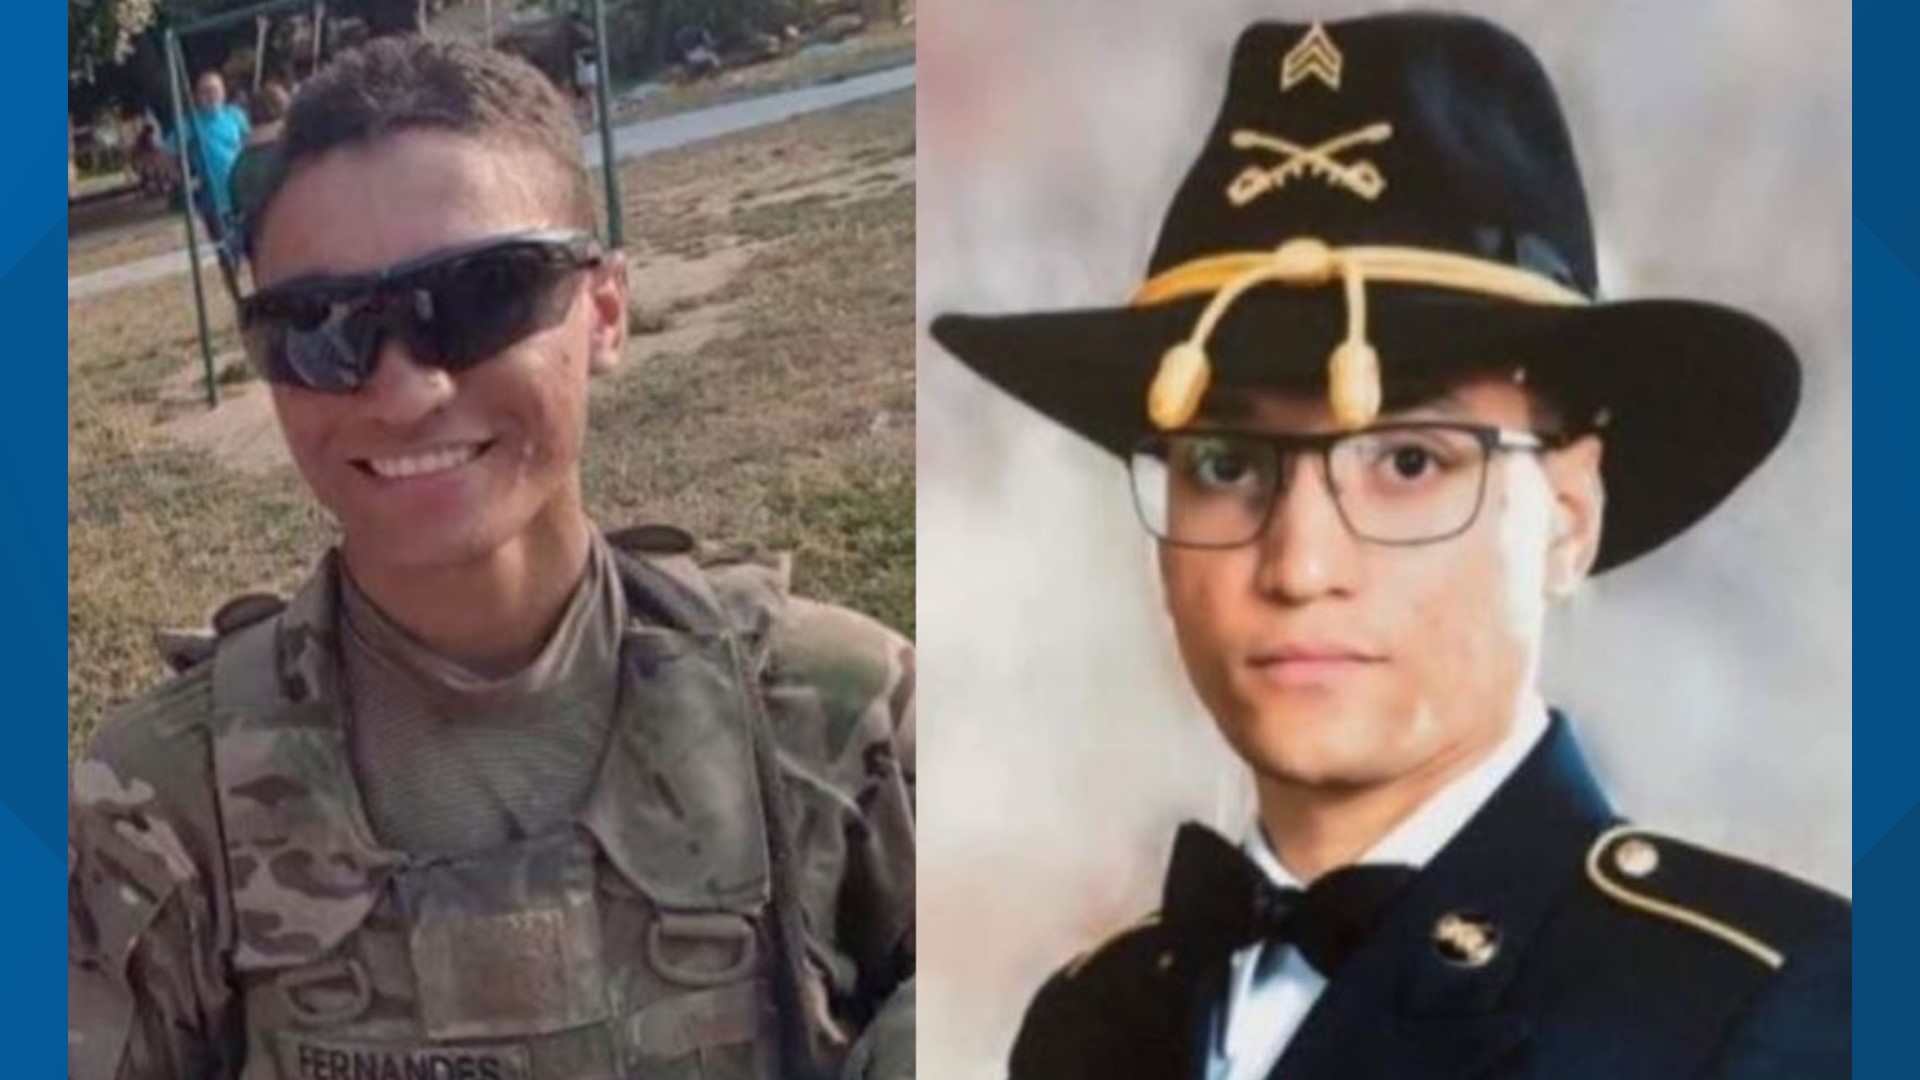 The missing soldier's family has been meeting daily with Fort Hood officials since the  family arrived in Central Texas last week.